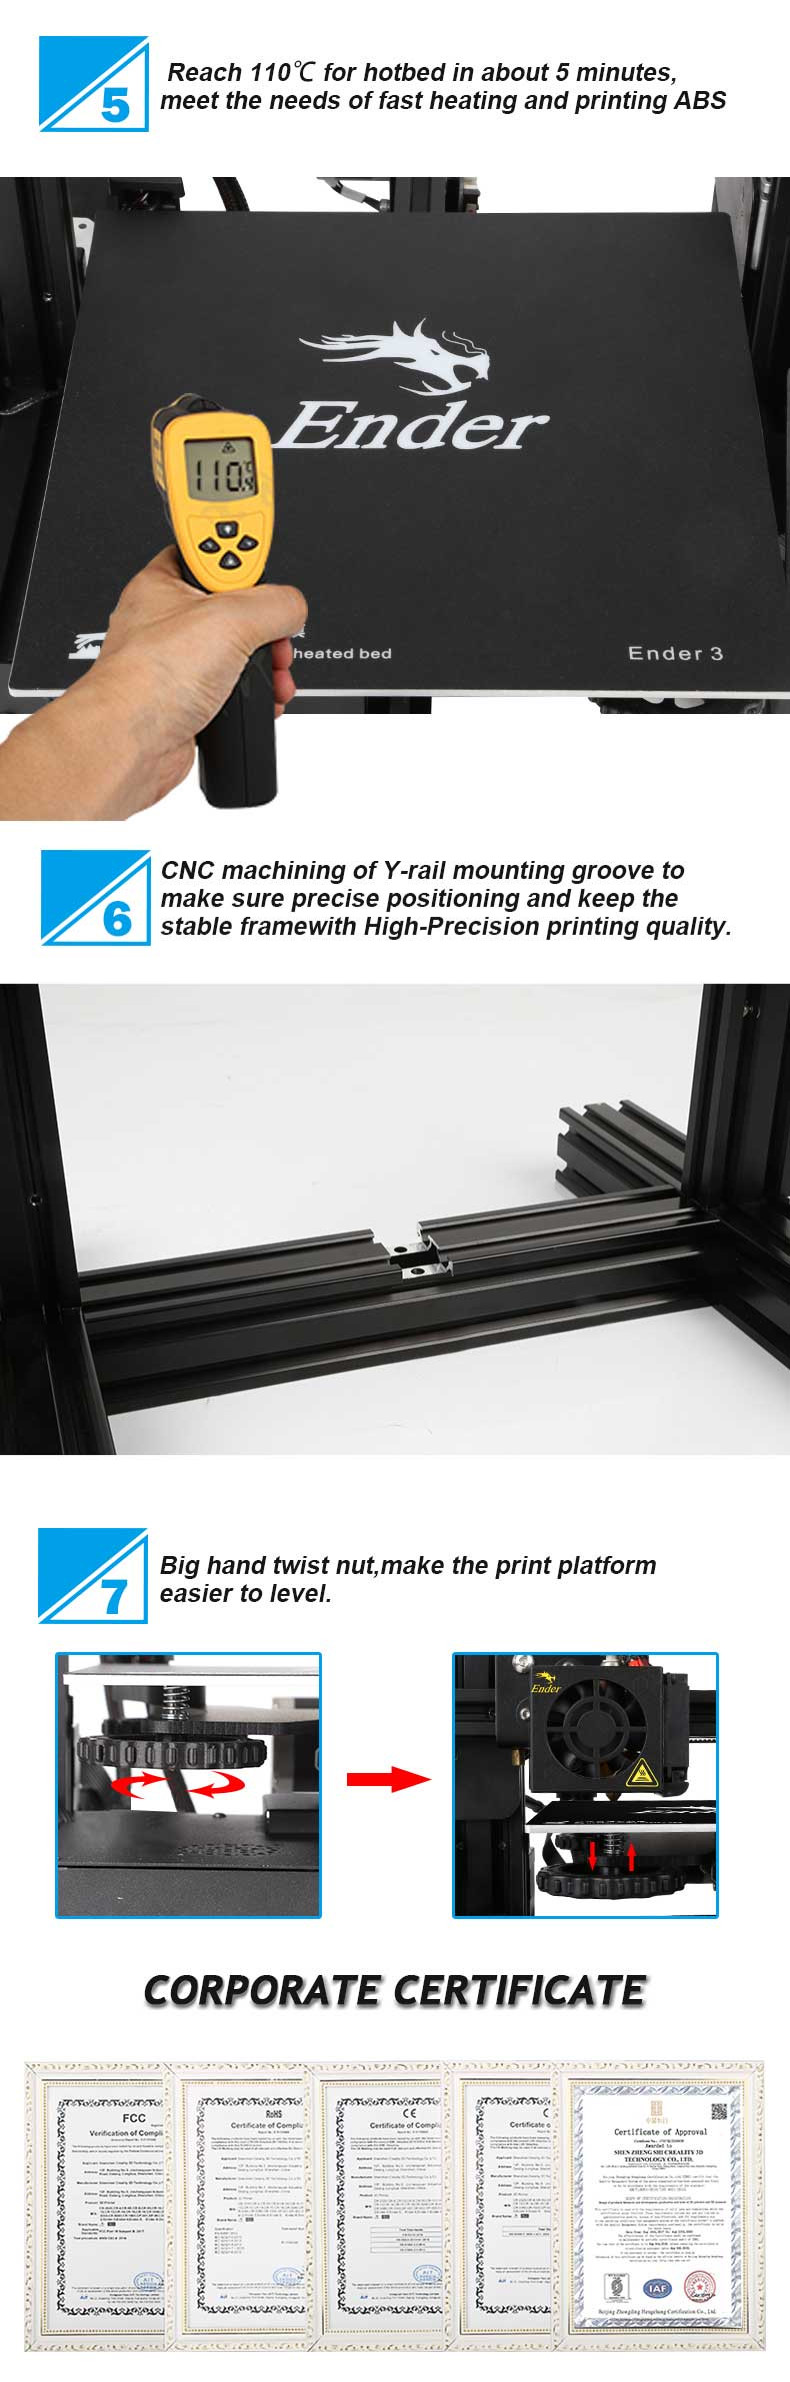 Creality 3D® Ender-3 V-slot Prusa I3 DIY 3D Printer Kit 220x220x250mm Printing Size With Power Resume Function/MK10 Extruder 1.75mm 0.4mm Nozzle 10